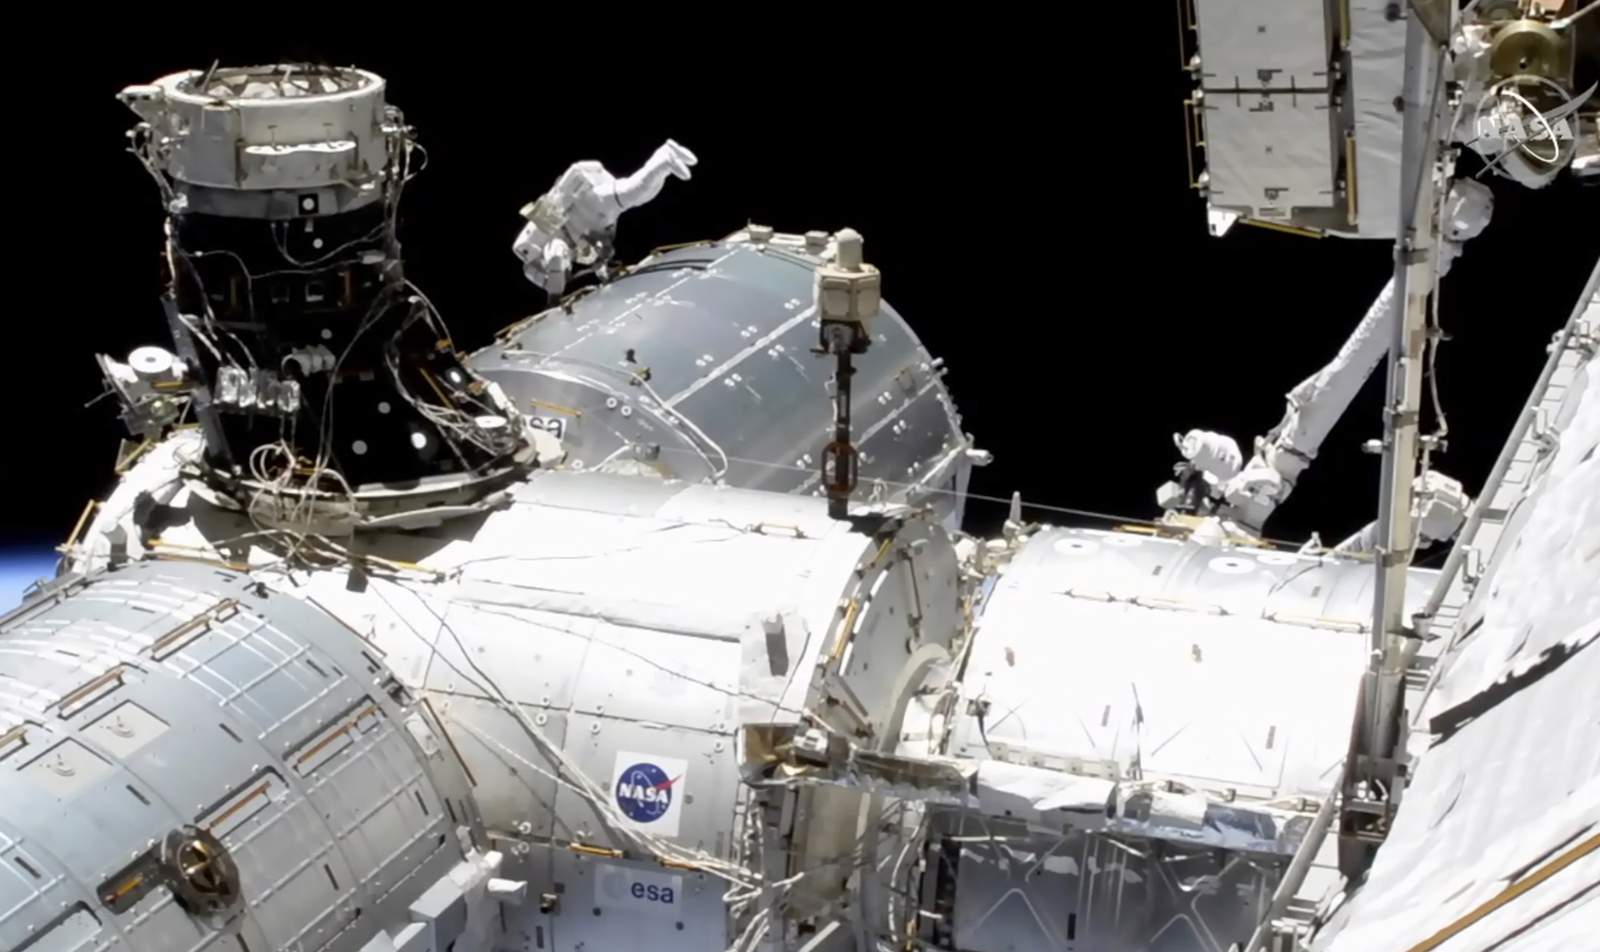 NASA astronauts depart ISS for first spacewalk of 2021